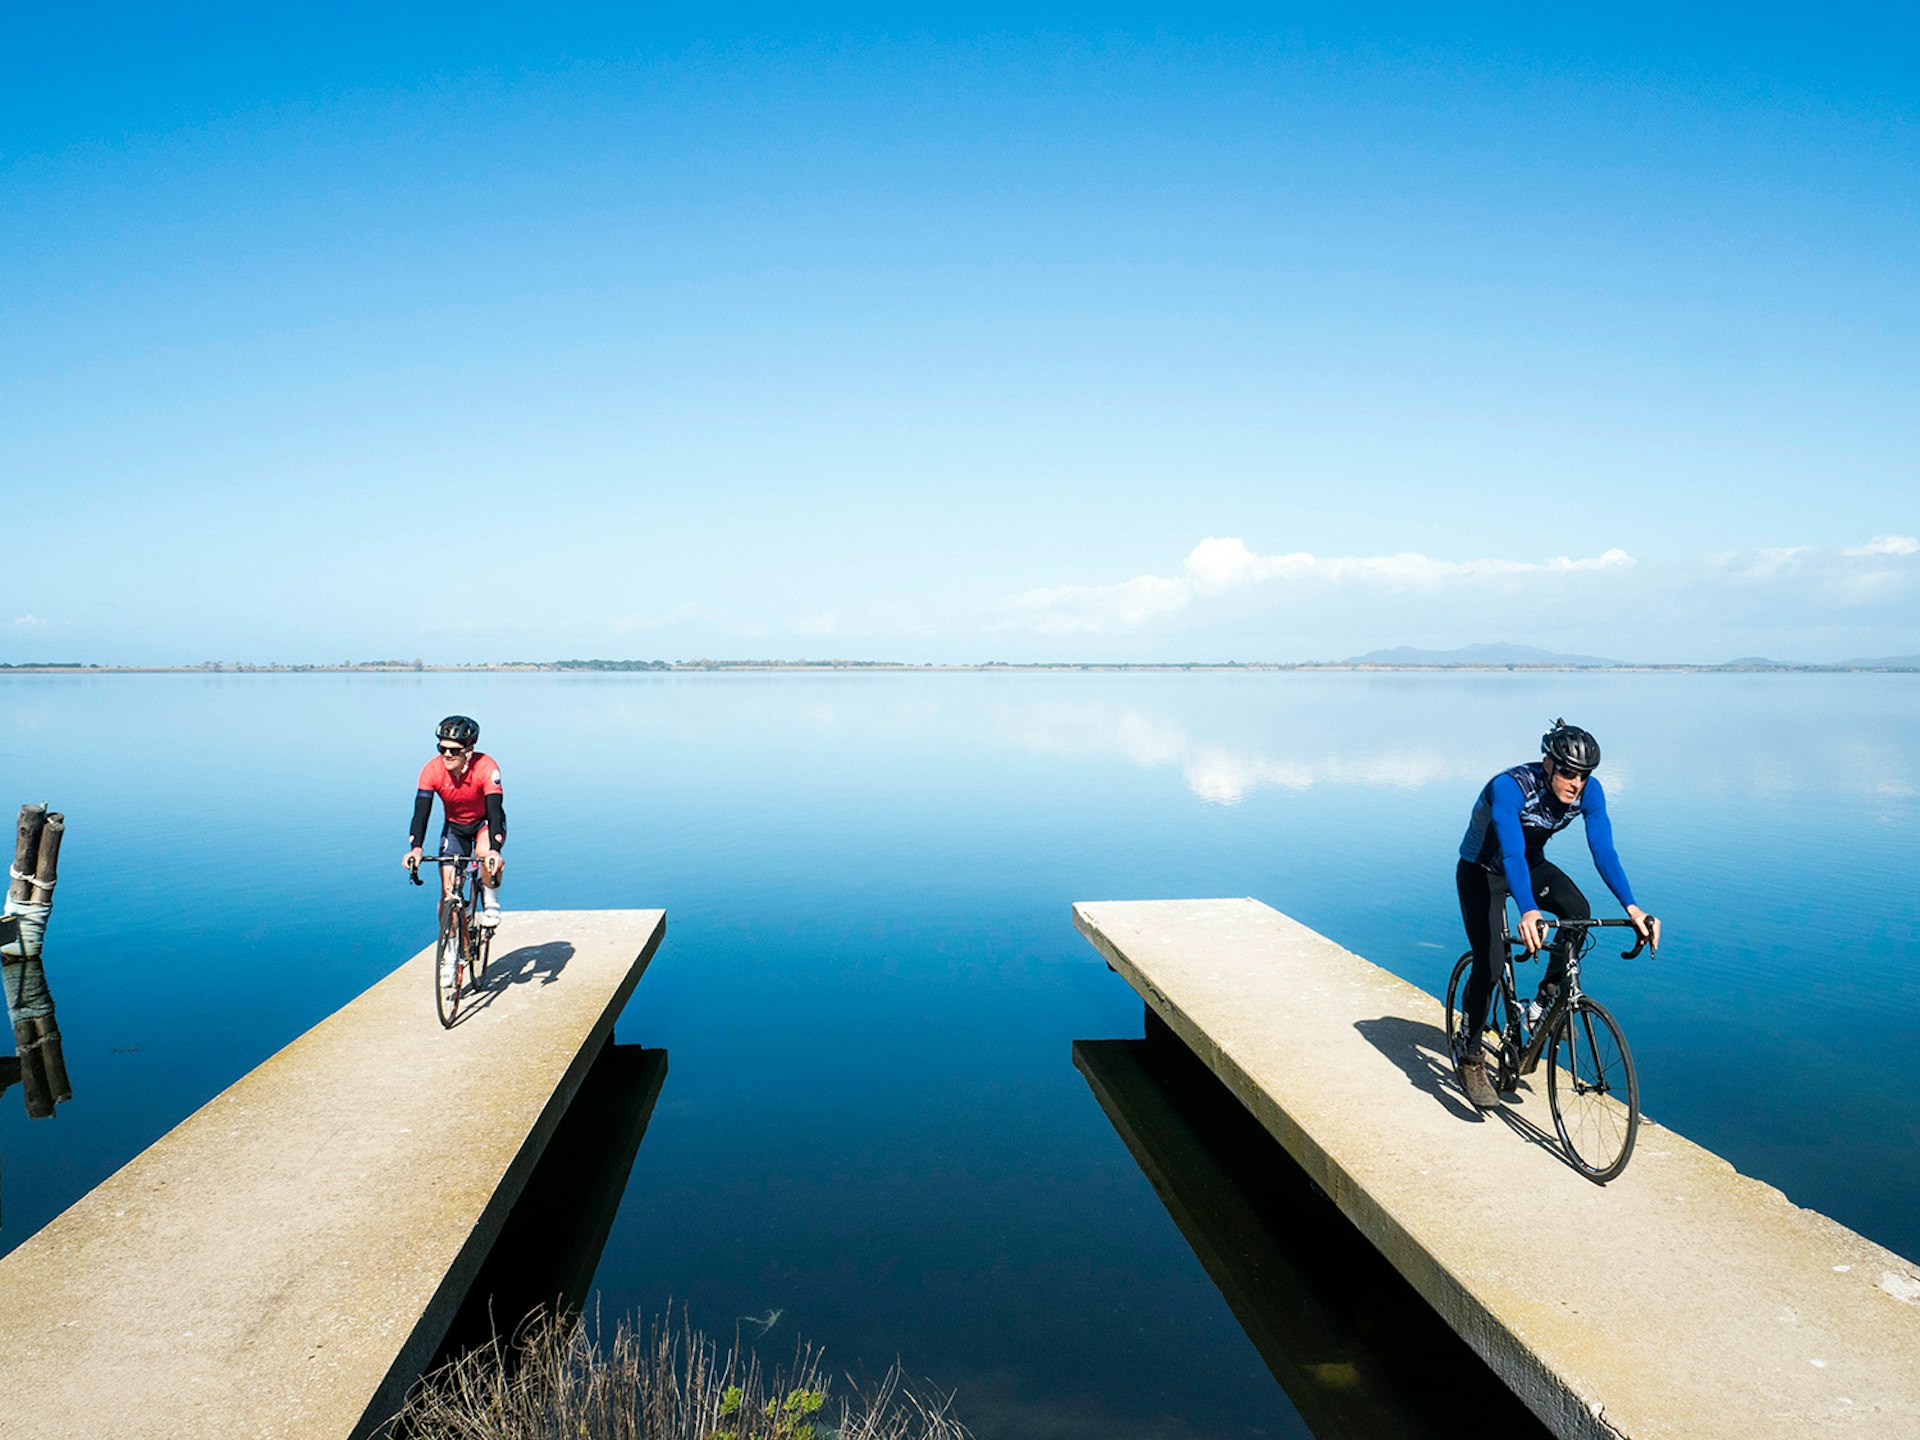 Two stark cement piers (each hosting a cyclist) reach out into the Orbetello Lagoon, which is reflecting the blue sky above © Paolo Ciaberta